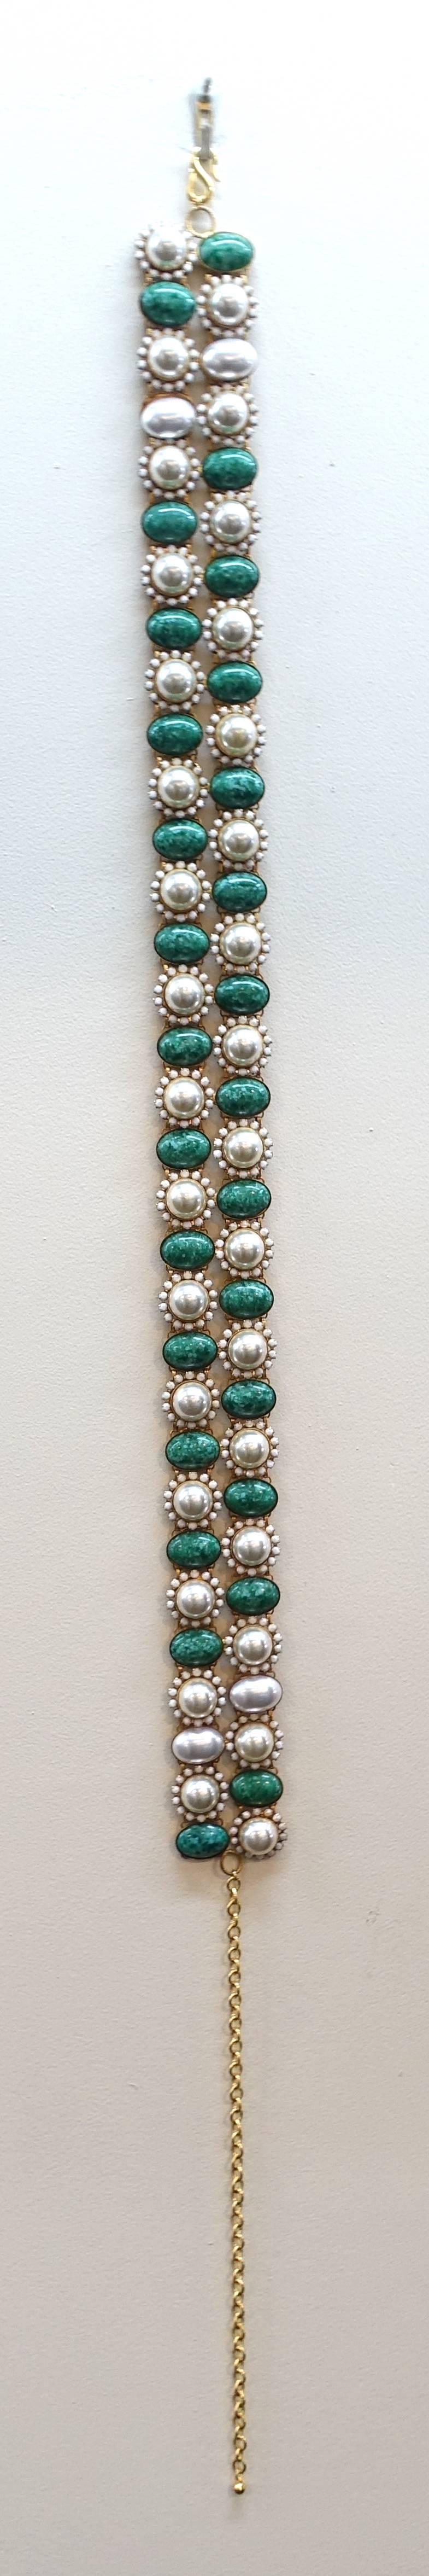 Women's or Men's Kenneth Jay Lane Vintage Faux Pearl and Green Stone Belt, 1960s  For Sale